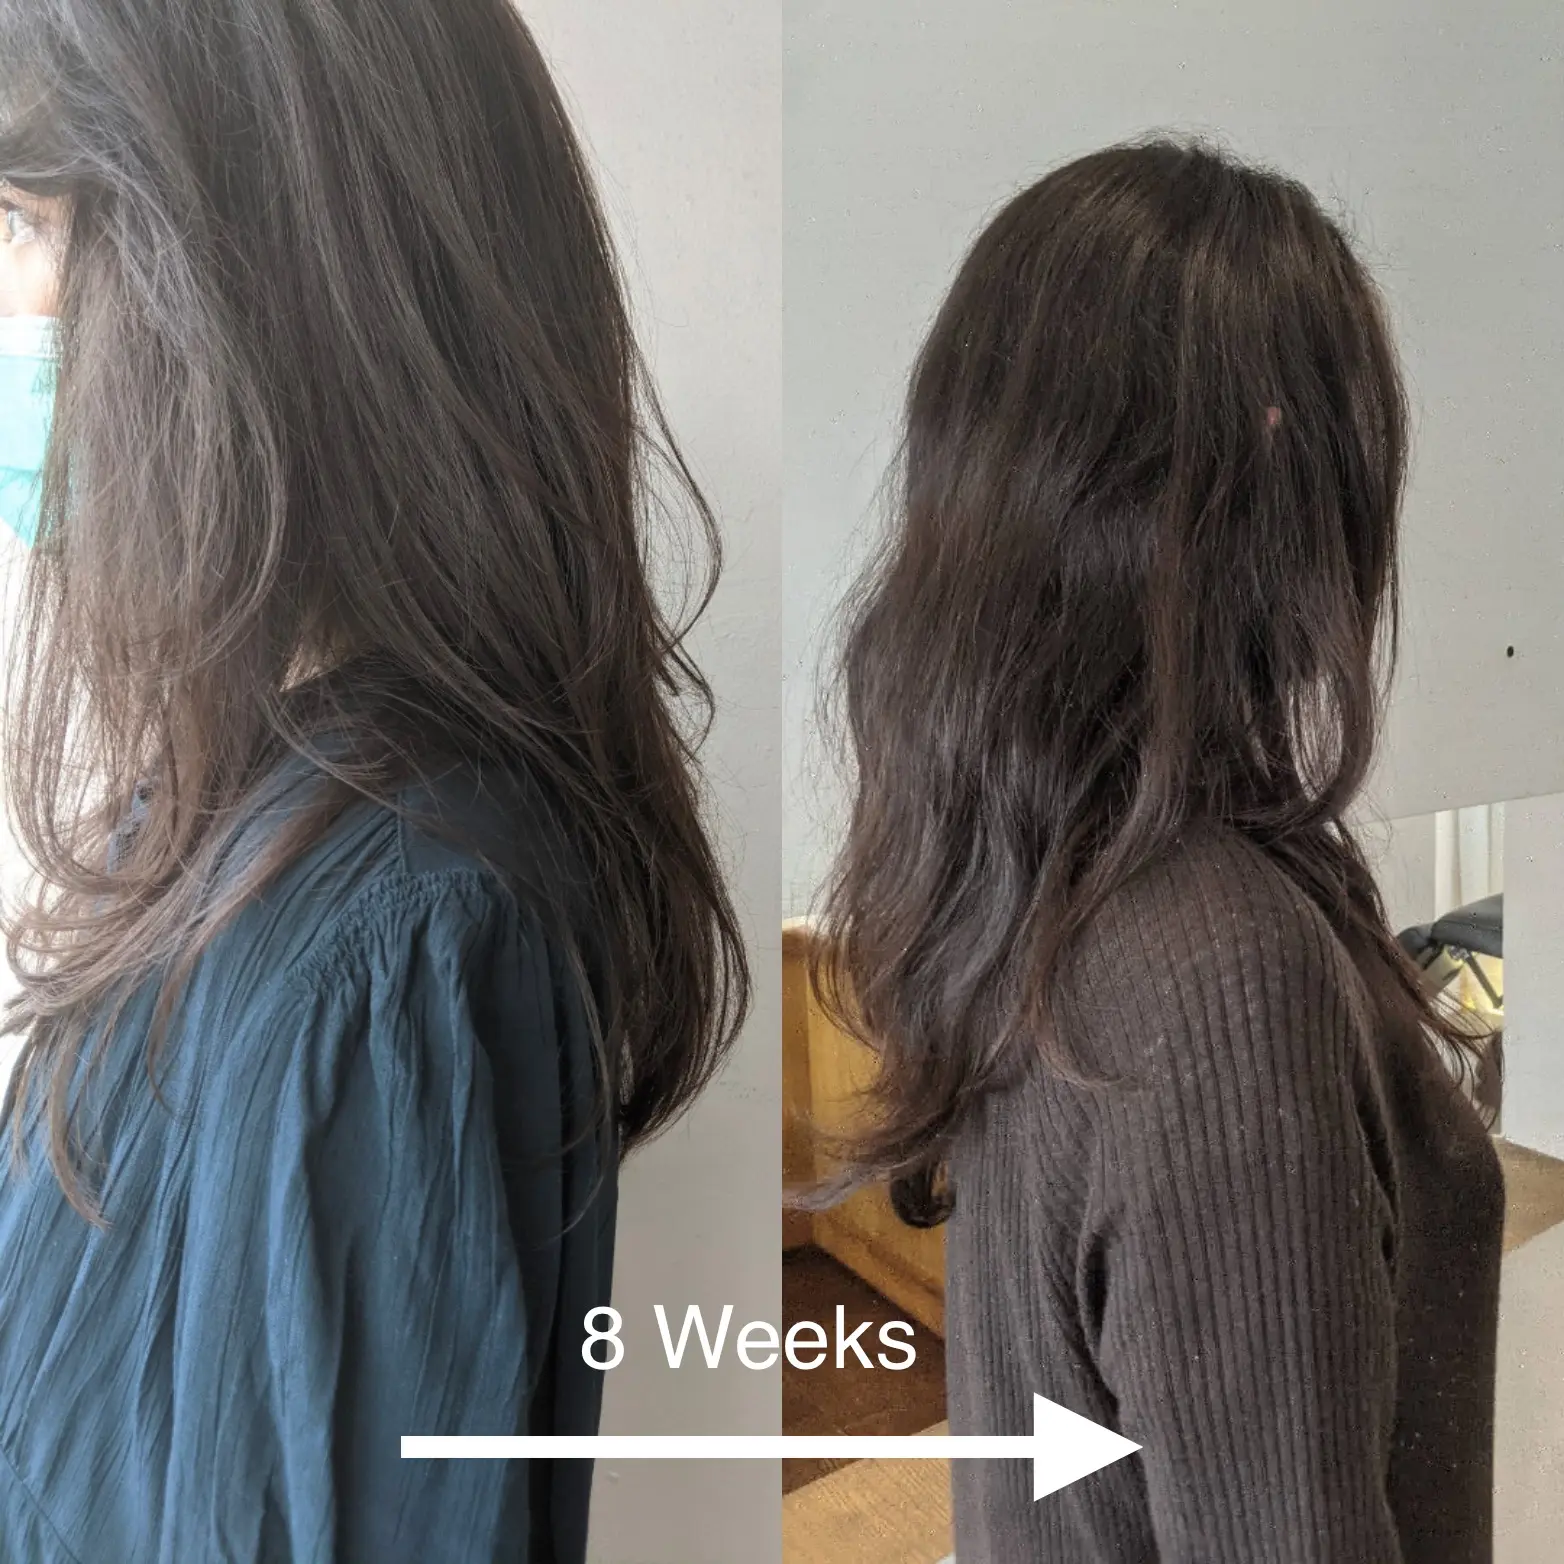 This is exactly, why getting hair cut every 6 weeks is best for long  hairstyles